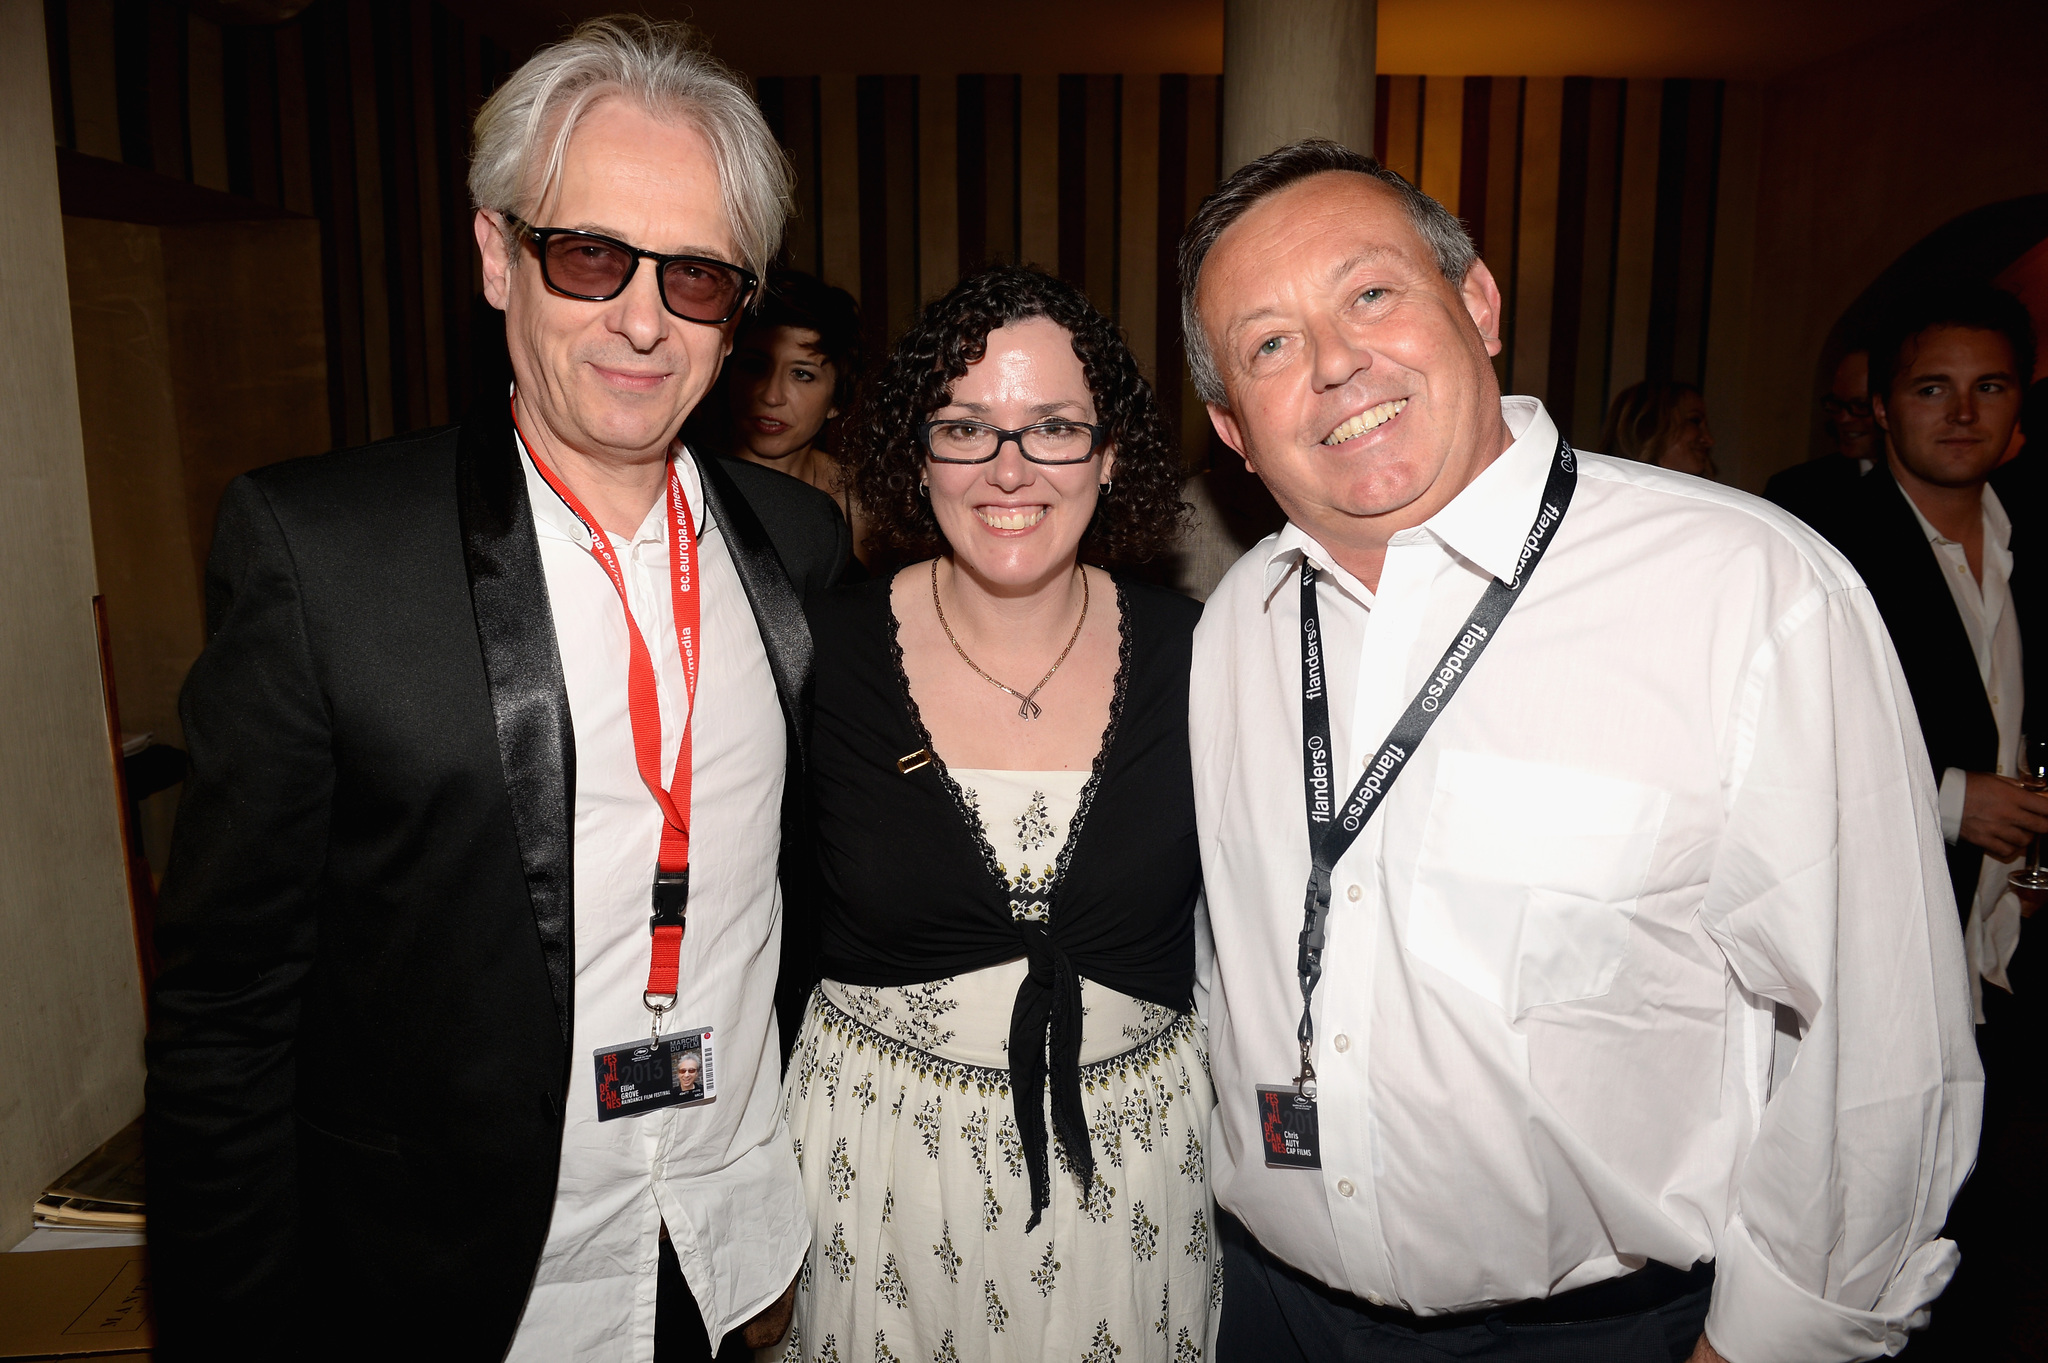 Rain Dance Film Festival's Elliot Grove, Karen Needham and NFTS' Chris Auty attend the IMDB's 2013 Cannes Film Festival Dinner Party during the 66th Annual Cannes Film Festival at Restaurant Mantel on May 20, 2013 in Cannes, France.